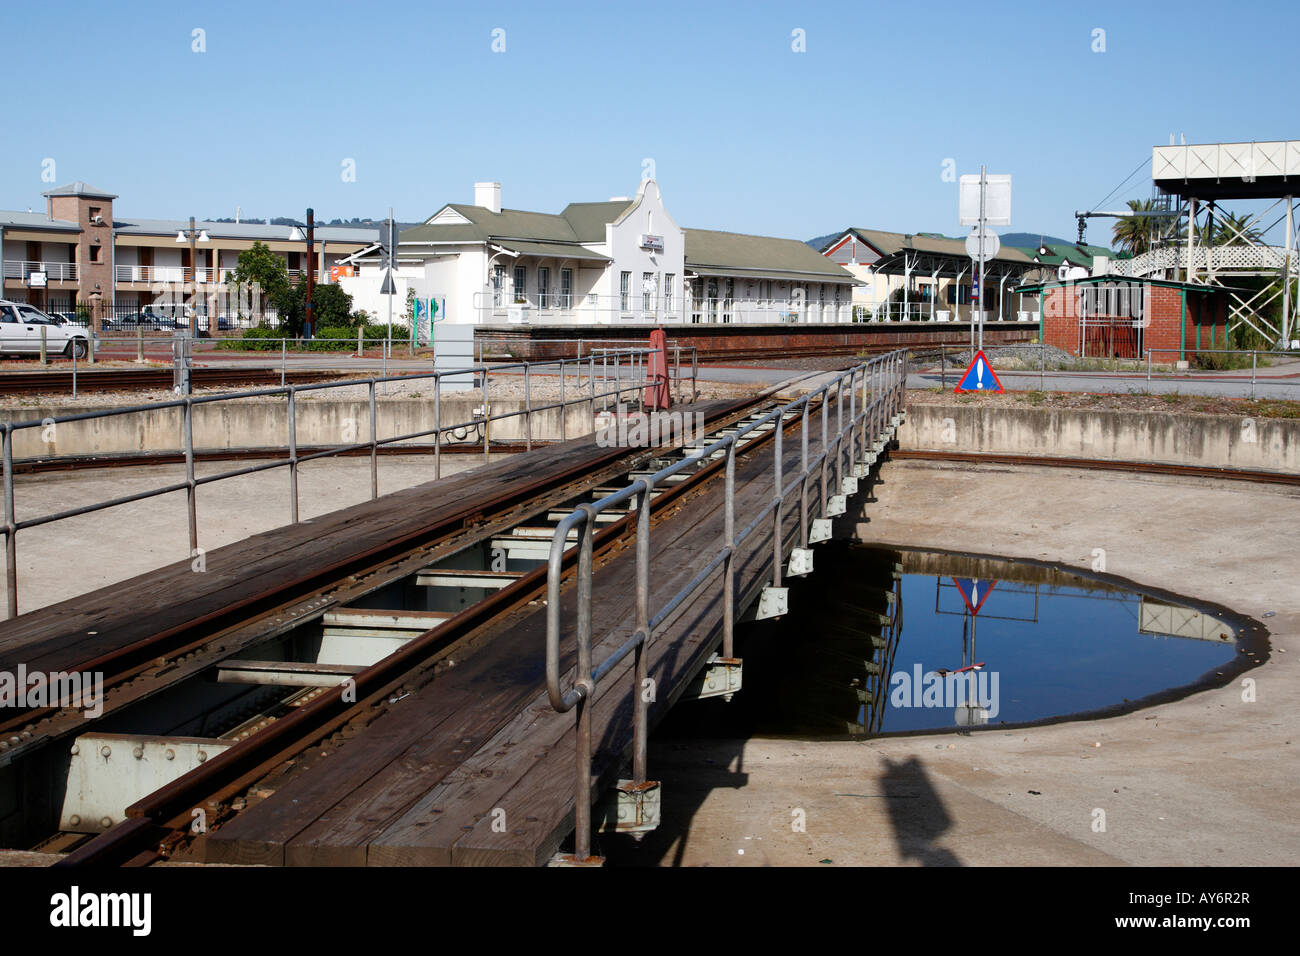 the turntable at knysna train station knysna garden route western cape province south africa Stock Photo